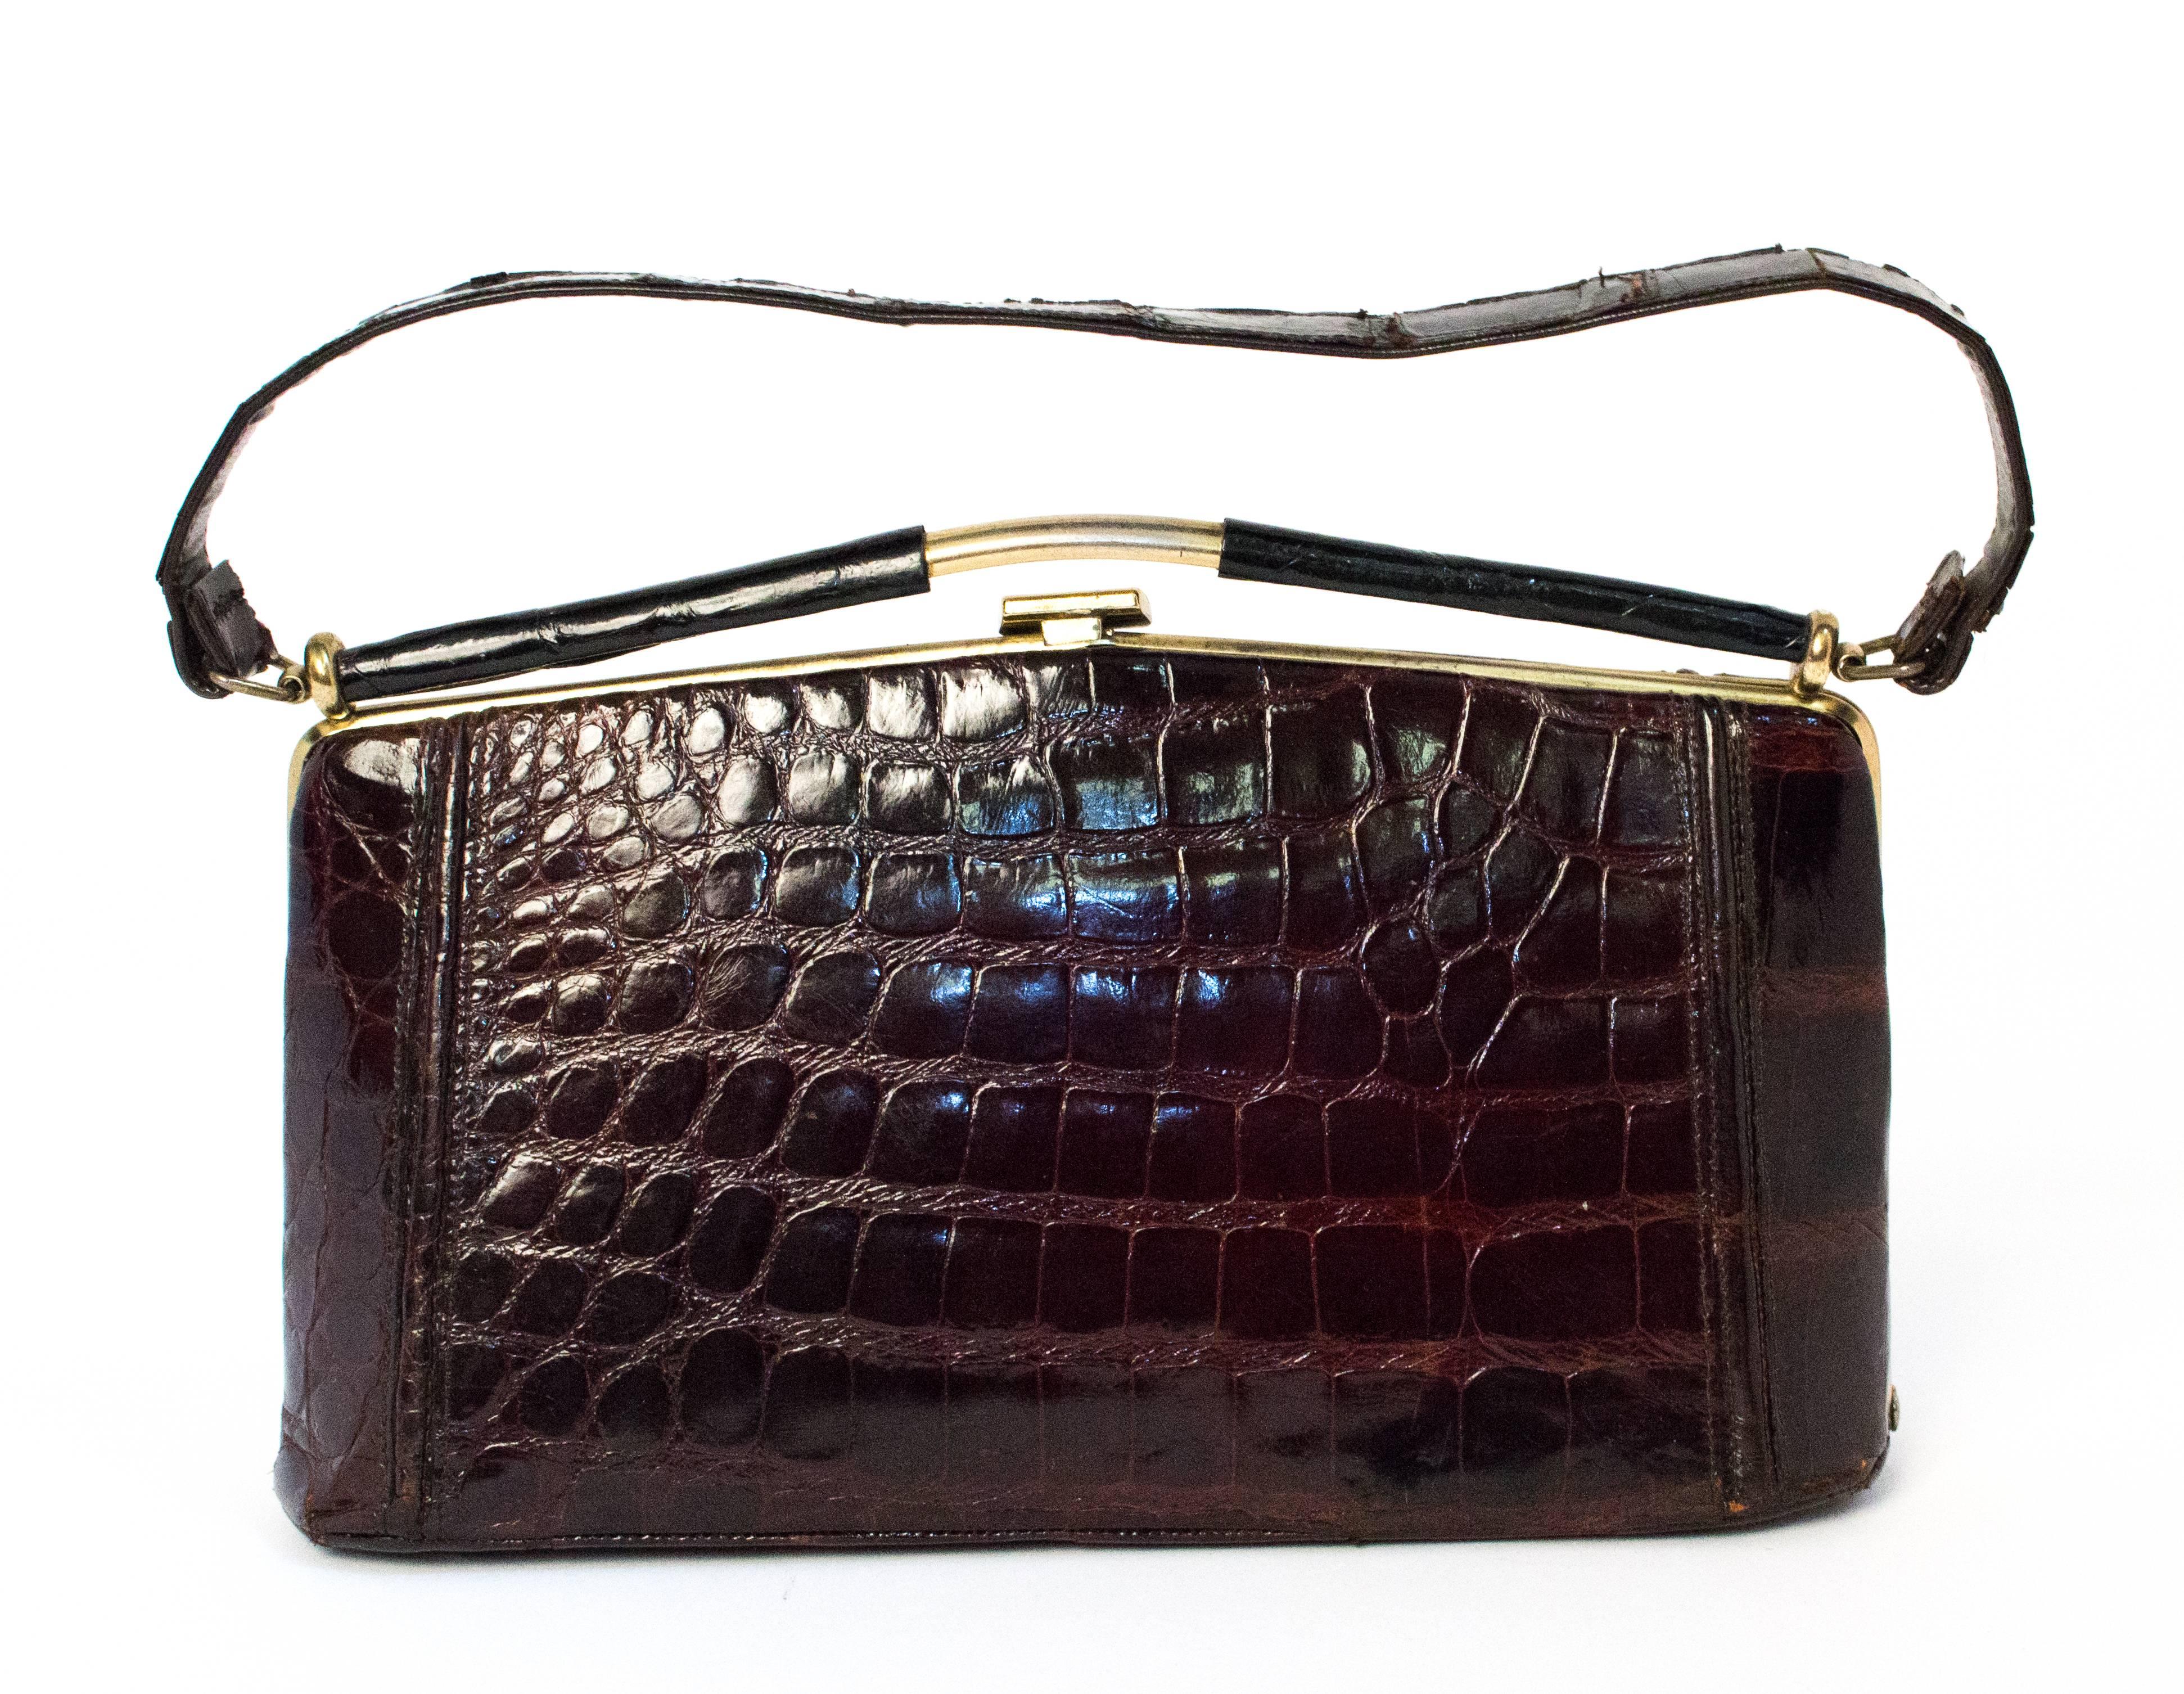 50s Brown Alligator Handbag. Alligator covered frame top. Gold toned hardware. One interior zip pocket. 

Measurements:
Body of bag: approx. 10 x 5 1/2 inches
Handle: 15 inches total